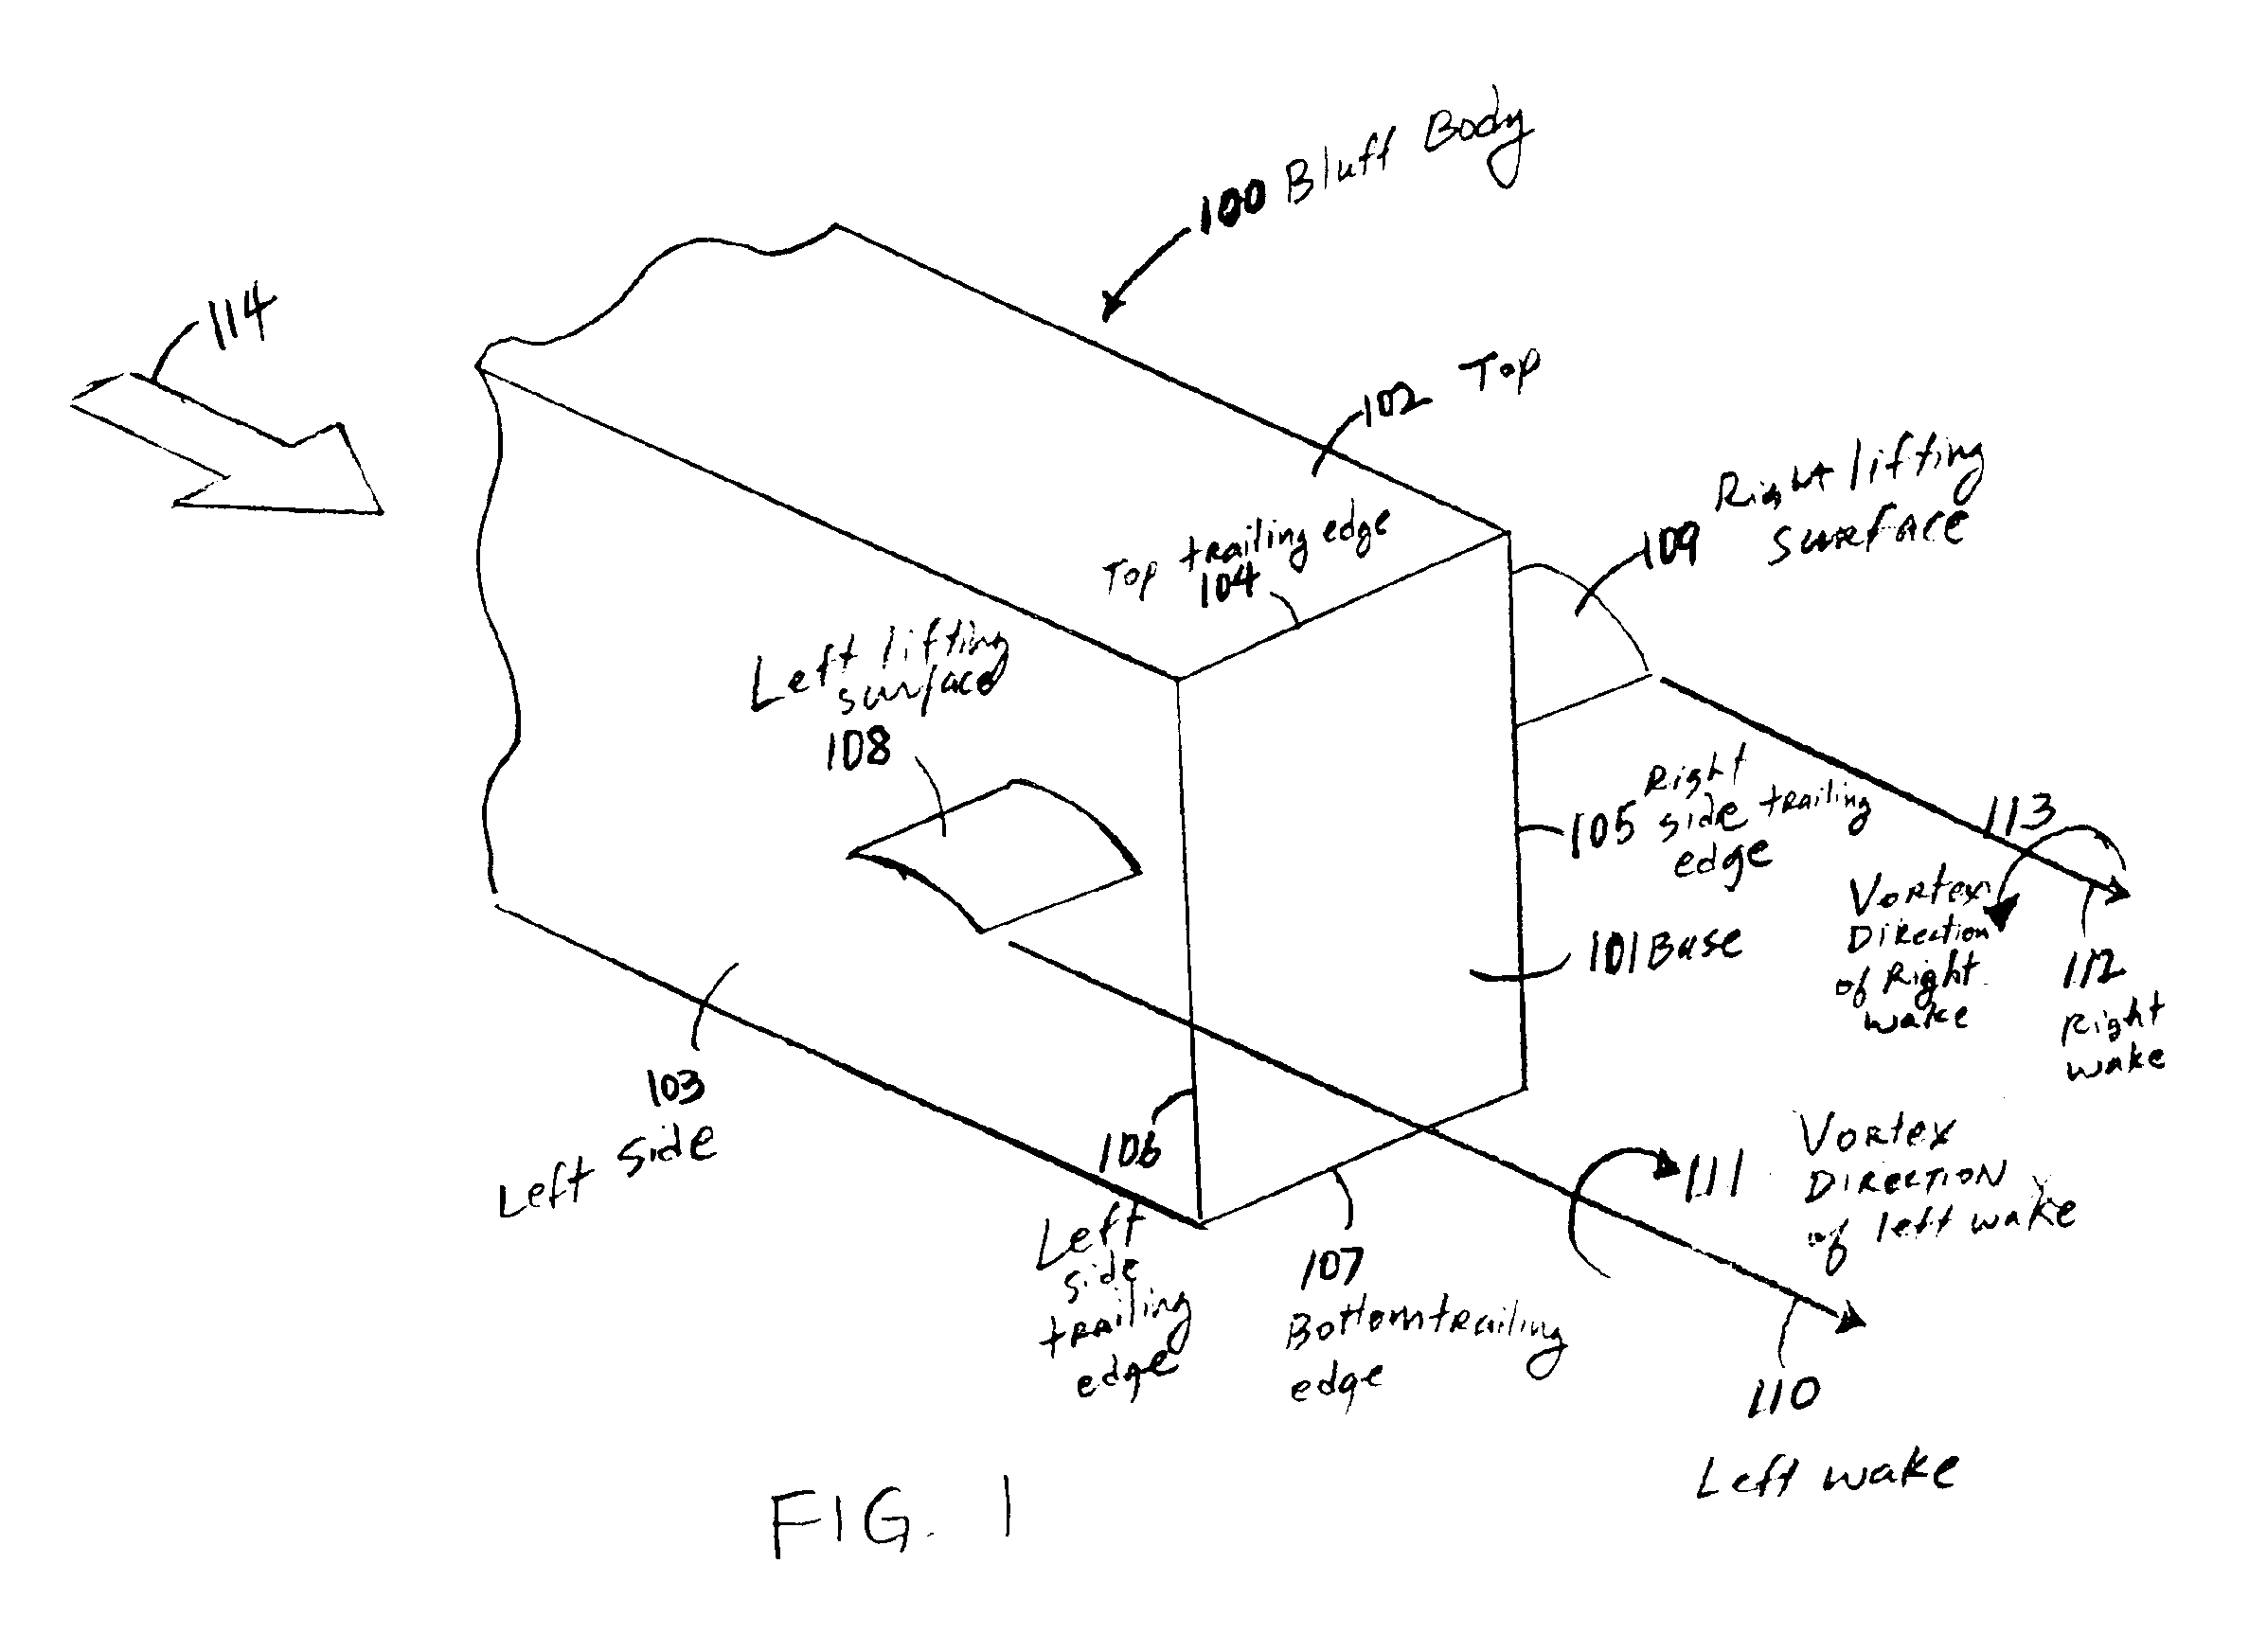 Apparatus and method for reducing drag of a bluff body in ground effect using counter-rotating vortex pairs